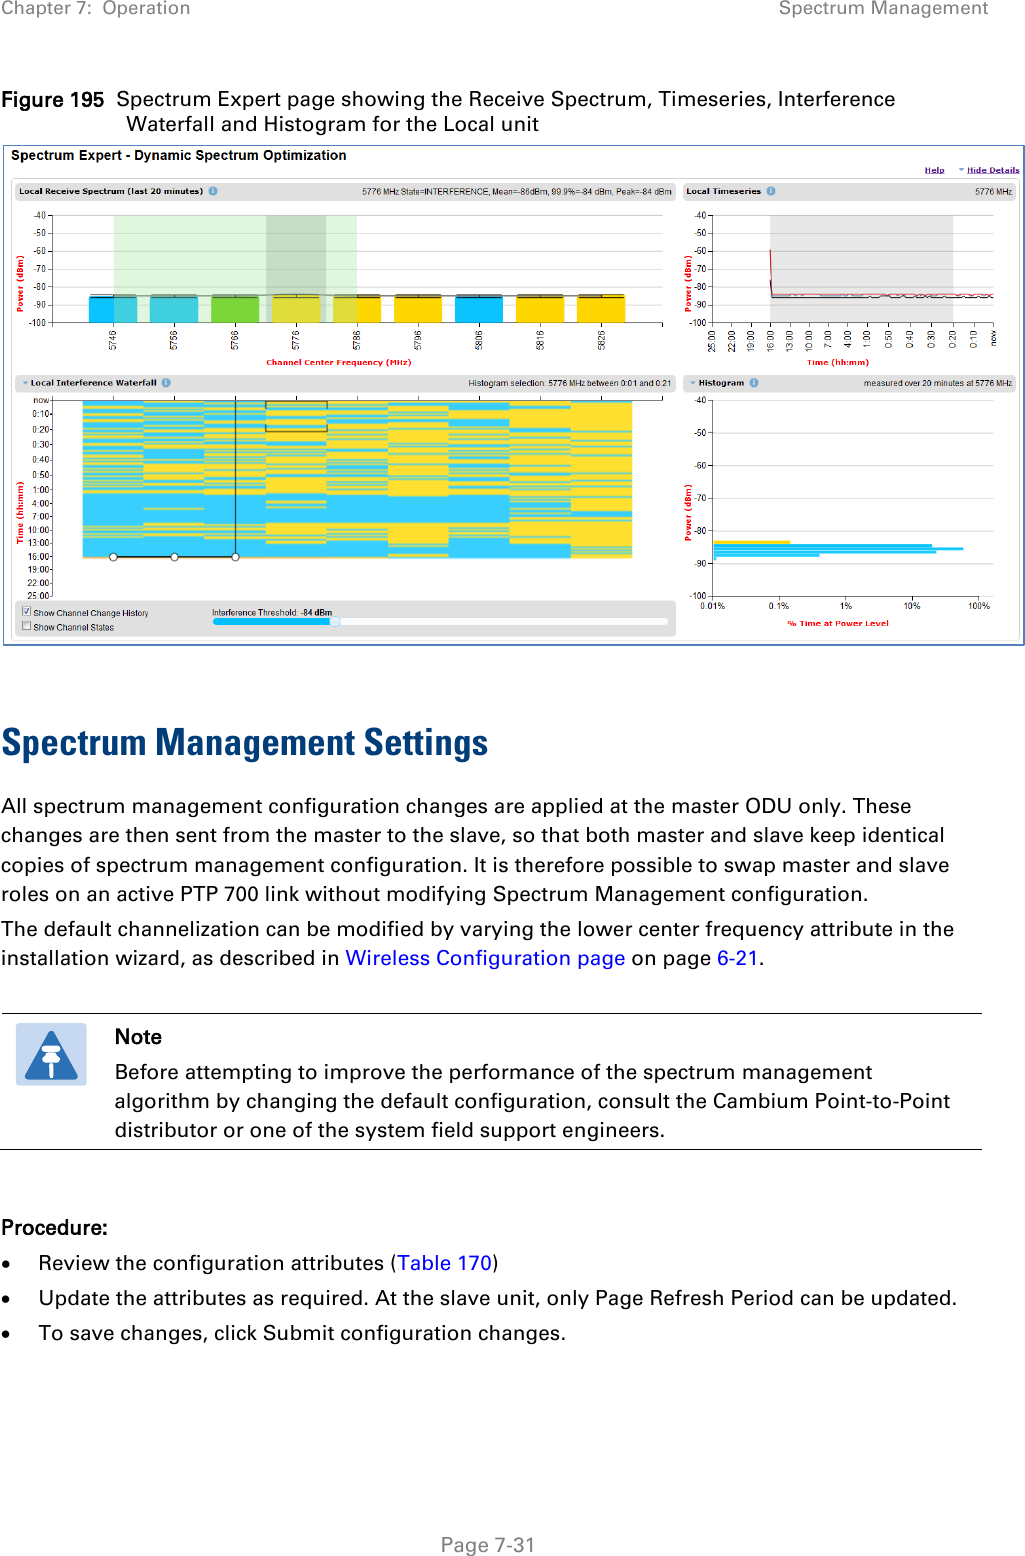 Chapter 7:  Operation Spectrum Management  Figure 195  Spectrum Expert page showing the Receive Spectrum, Timeseries, Interference Waterfall and Histogram for the Local unit   Spectrum Management Settings All spectrum management configuration changes are applied at the master ODU only. These changes are then sent from the master to the slave, so that both master and slave keep identical copies of spectrum management configuration. It is therefore possible to swap master and slave roles on an active PTP 700 link without modifying Spectrum Management configuration. The default channelization can be modified by varying the lower center frequency attribute in the installation wizard, as described in Wireless Configuration page on page 6-21.    Note Before attempting to improve the performance of the spectrum management algorithm by changing the default configuration, consult the Cambium Point-to-Point distributor or one of the system field support engineers.  Procedure: • Review the configuration attributes (Table 170) • Update the attributes as required. At the slave unit, only Page Refresh Period can be updated. • To save changes, click Submit configuration changes.   Page 7-31 